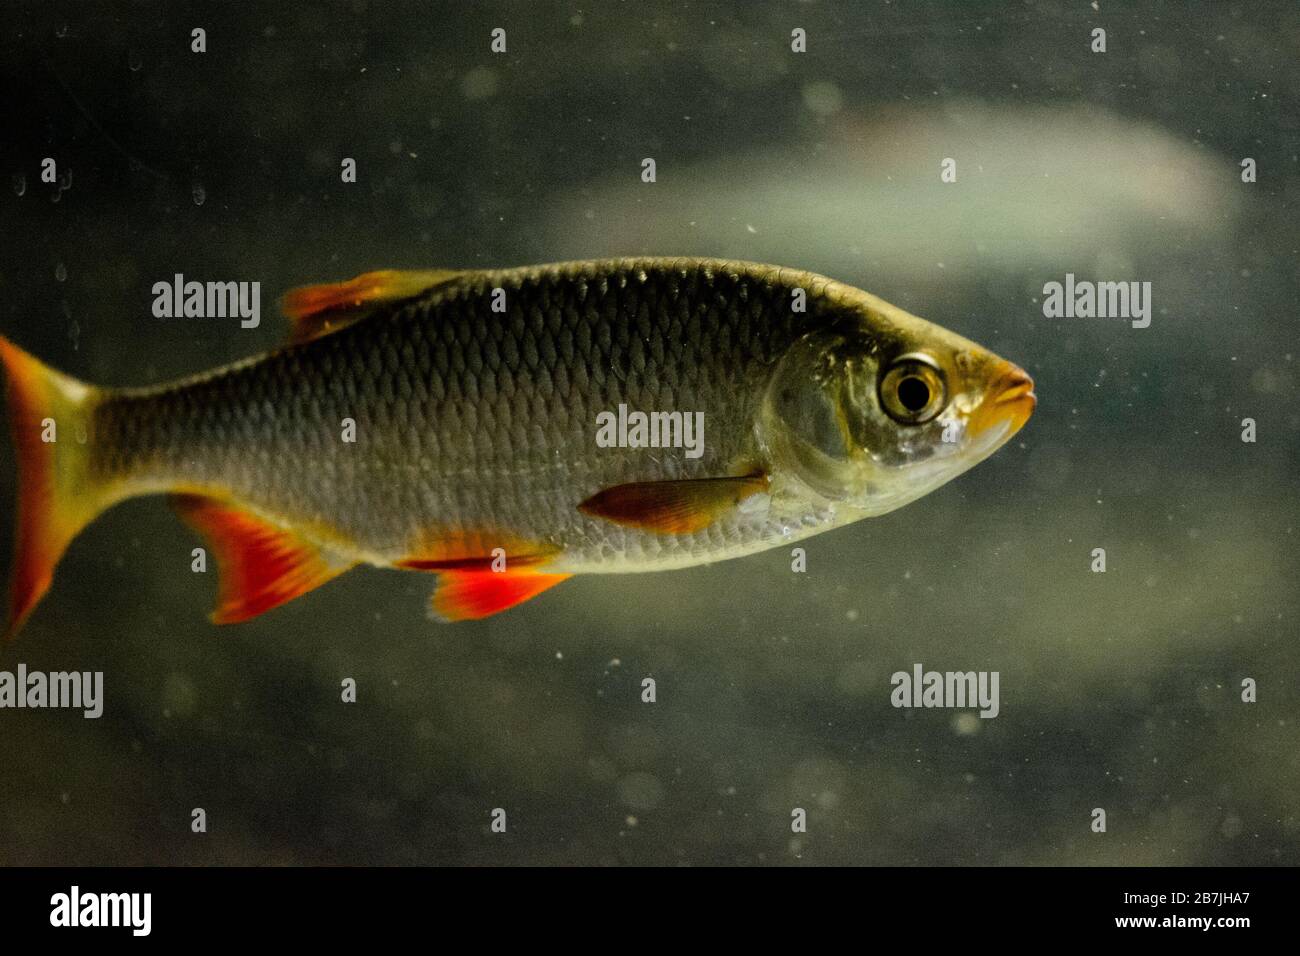 The common rudd - Scardinius erythrophthalmus. Fish from Europe and Asia Stock Photo